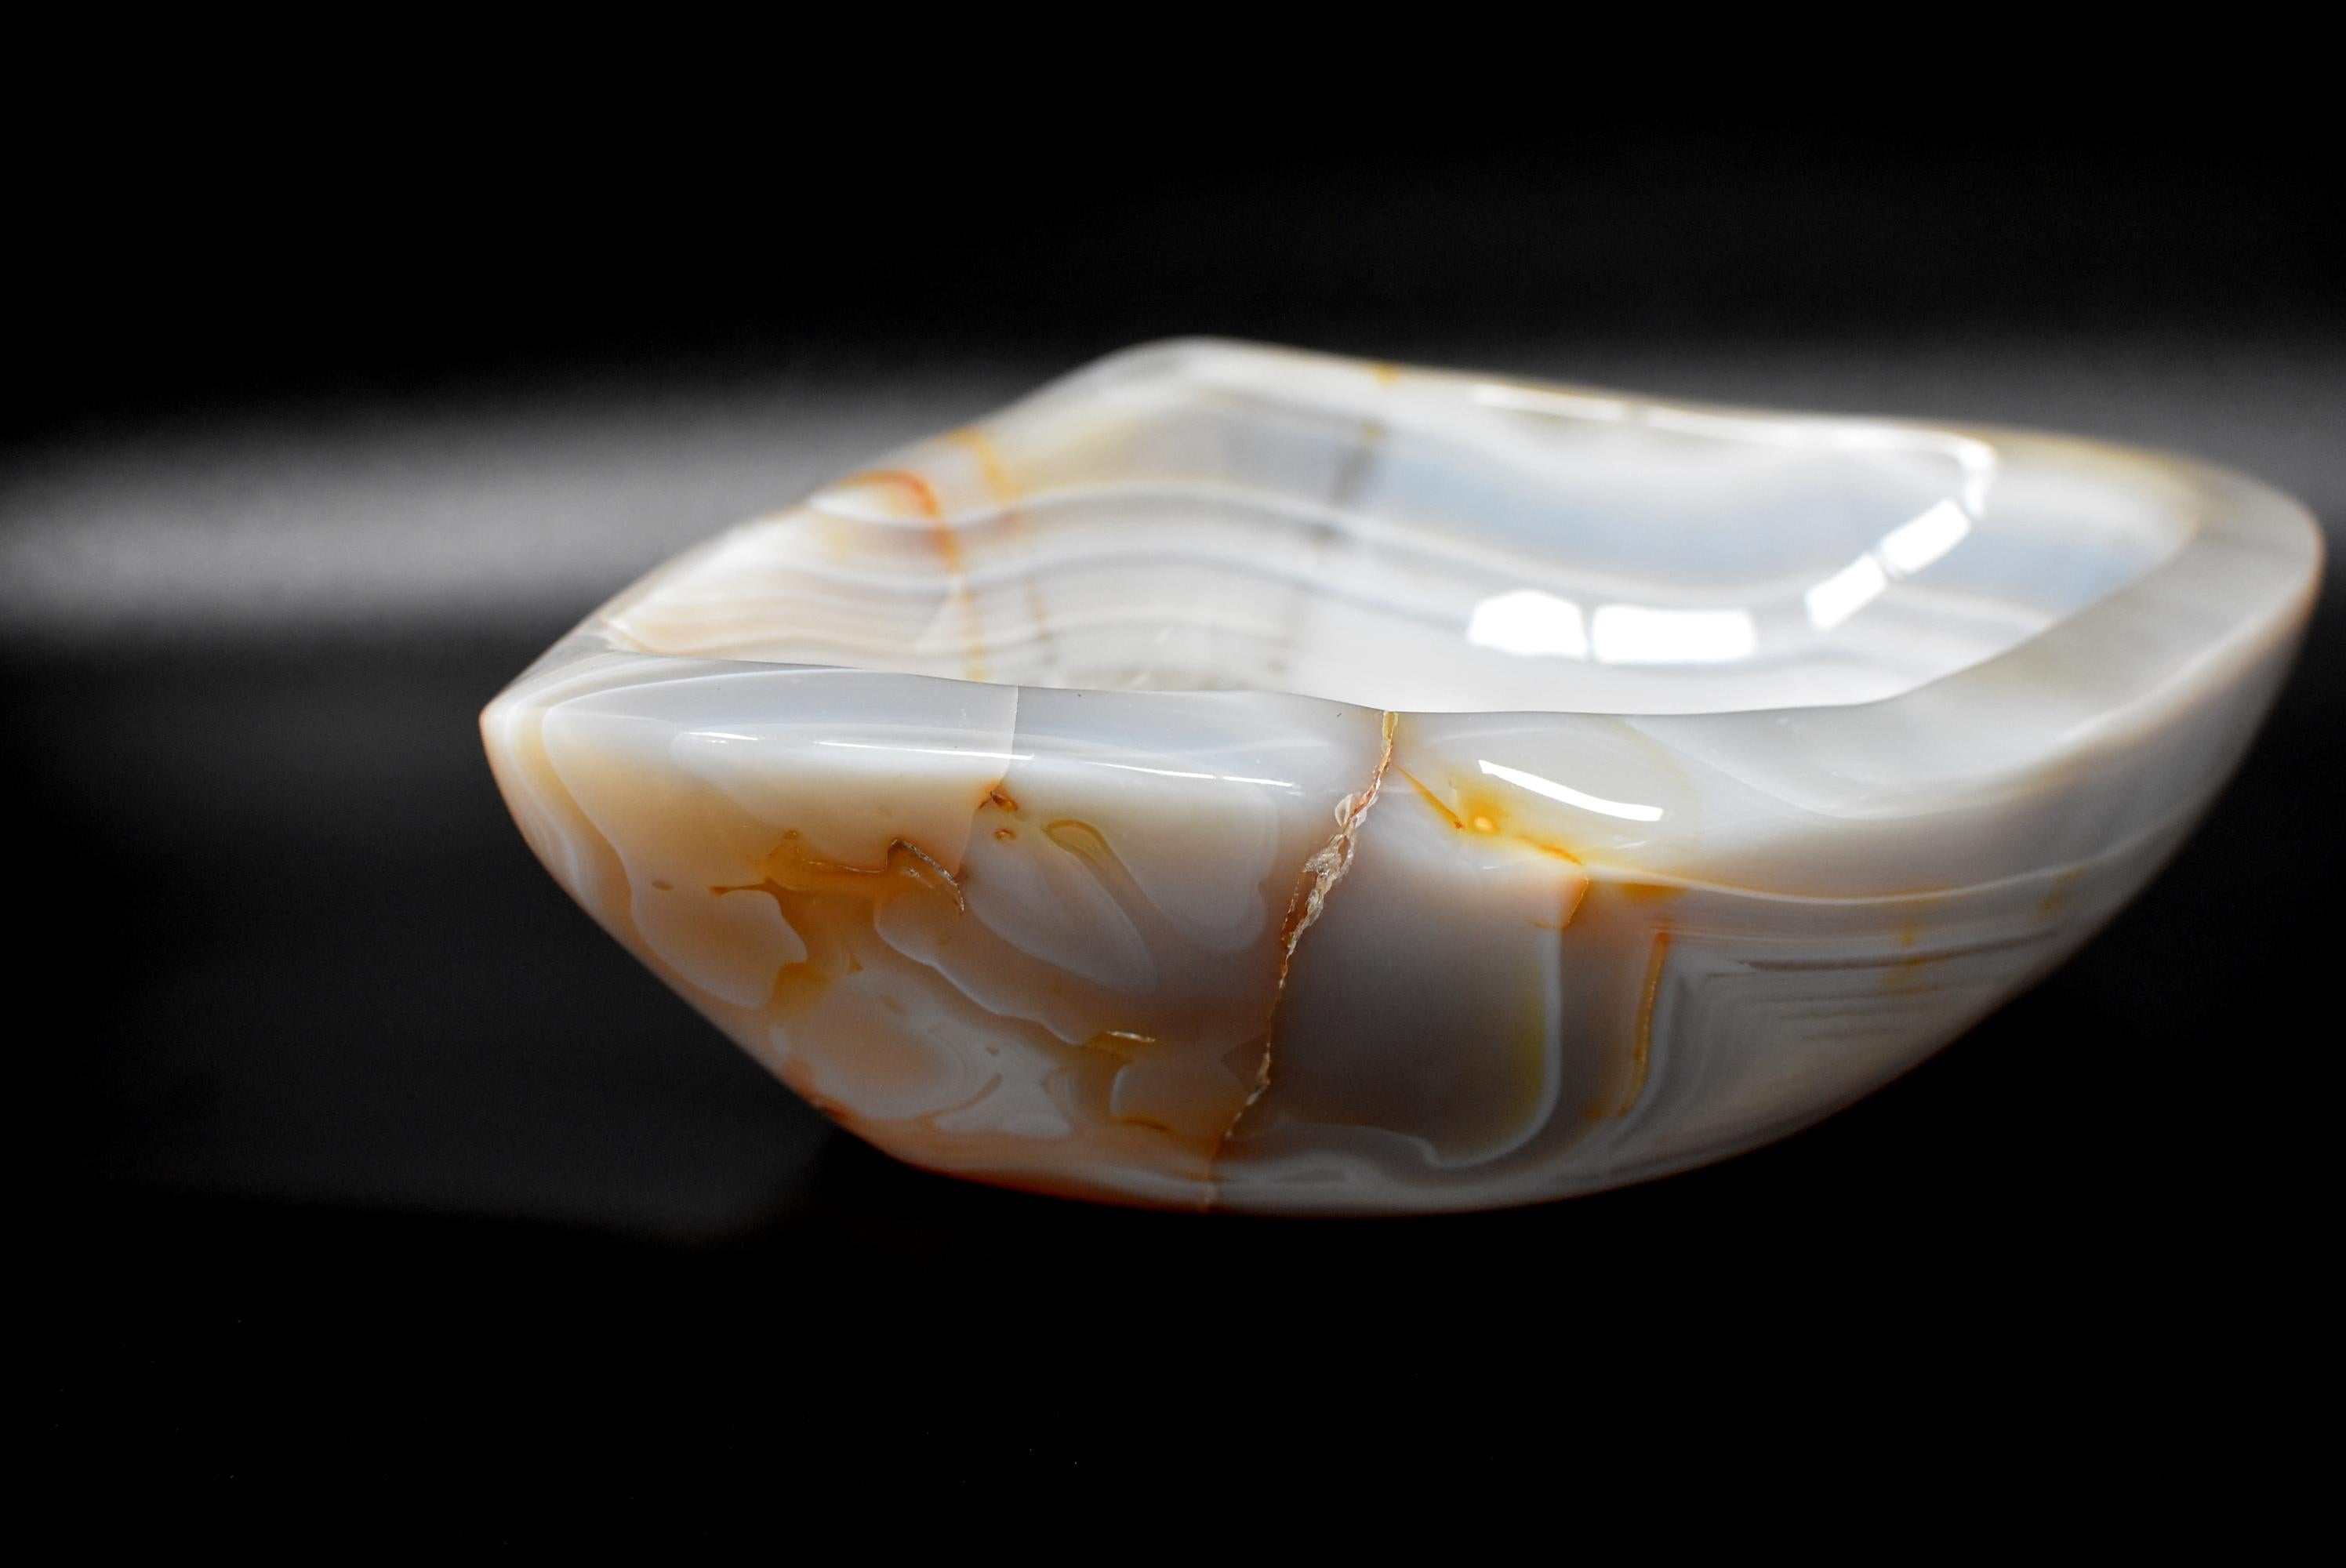 A stunning, large, 4.6 lb, all natural agate bowl with fantastic swirls and crystals. Its mellow yet luminous luster combined with fascinating crystals makes it a remarkable center piece. Its sophisticated taupe color suits any elegant interior.